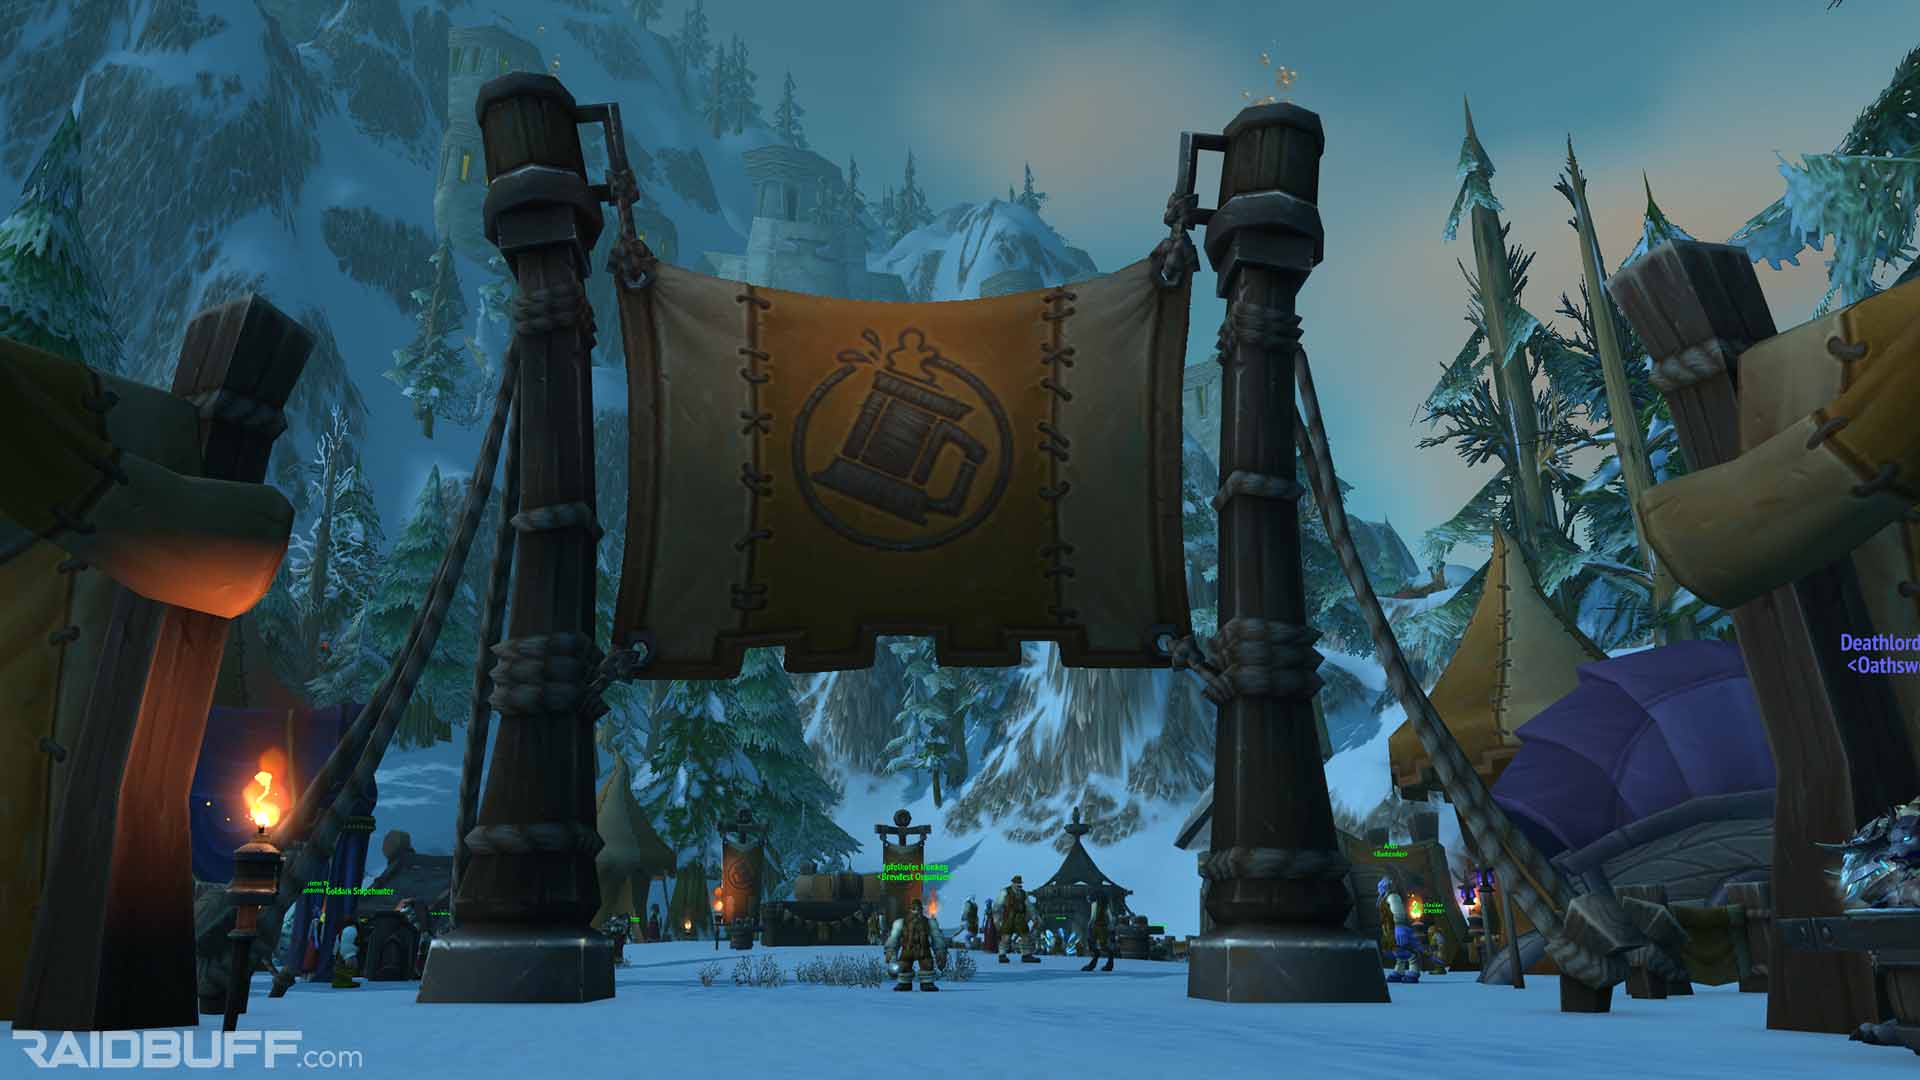 The Brewfest area outside of Ironforge